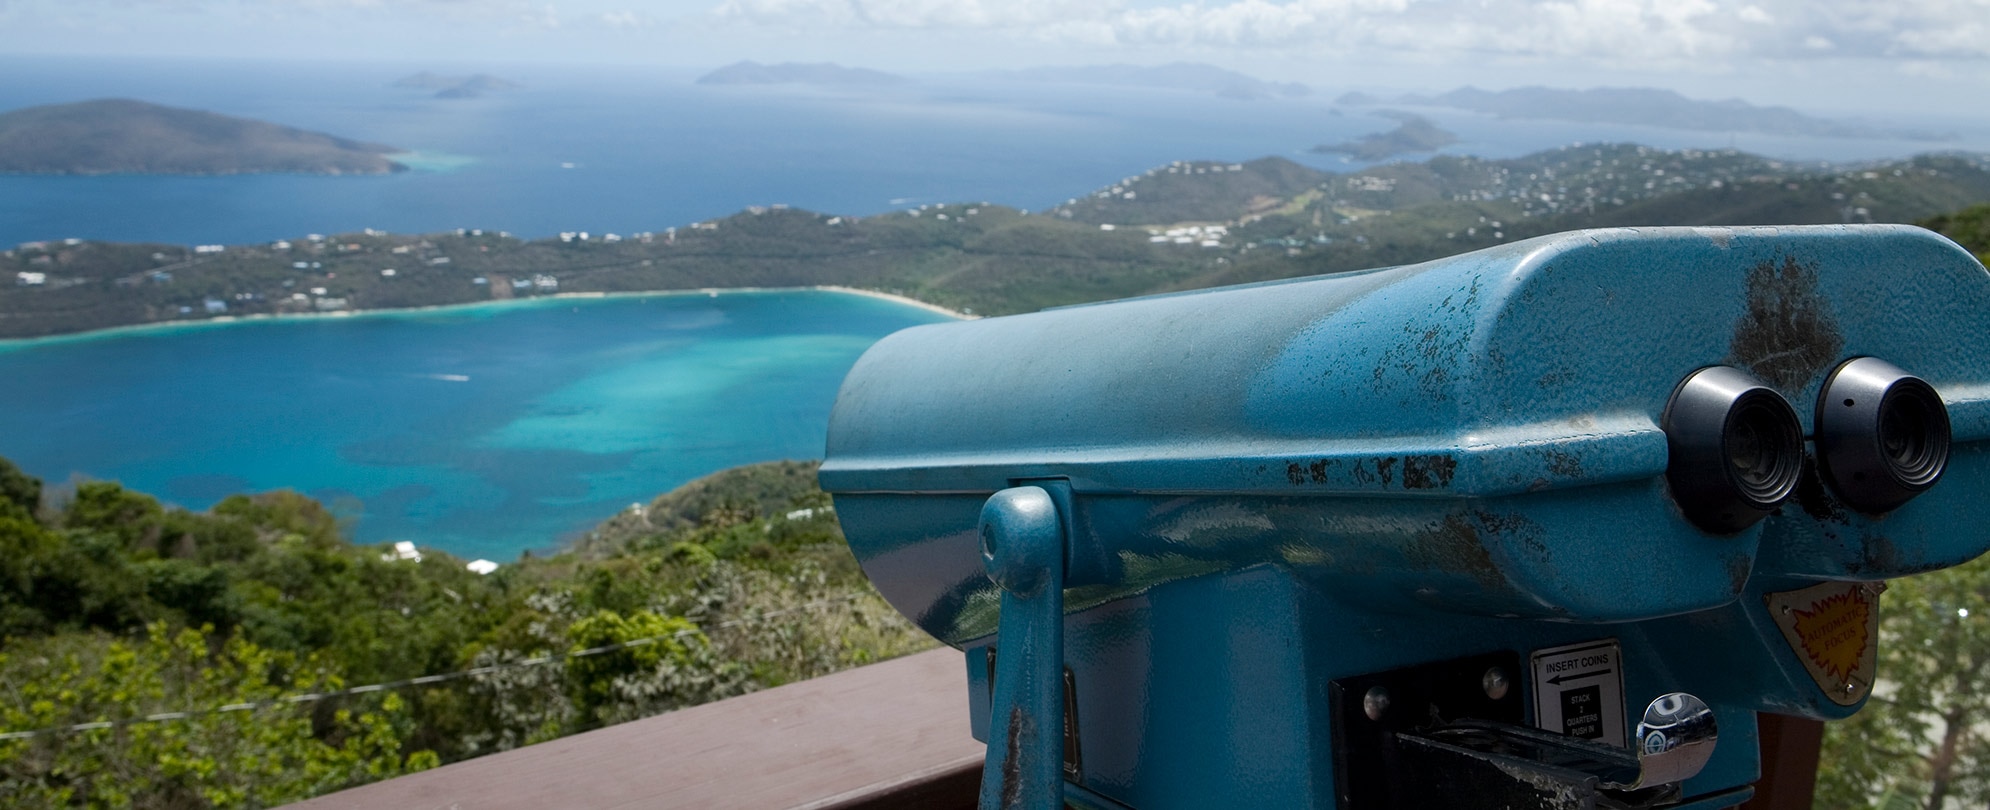 Coin-operated binoculars pointing towards the bright blue waters and lush mountains of St. Thomas, U.S. Virgin Islands.